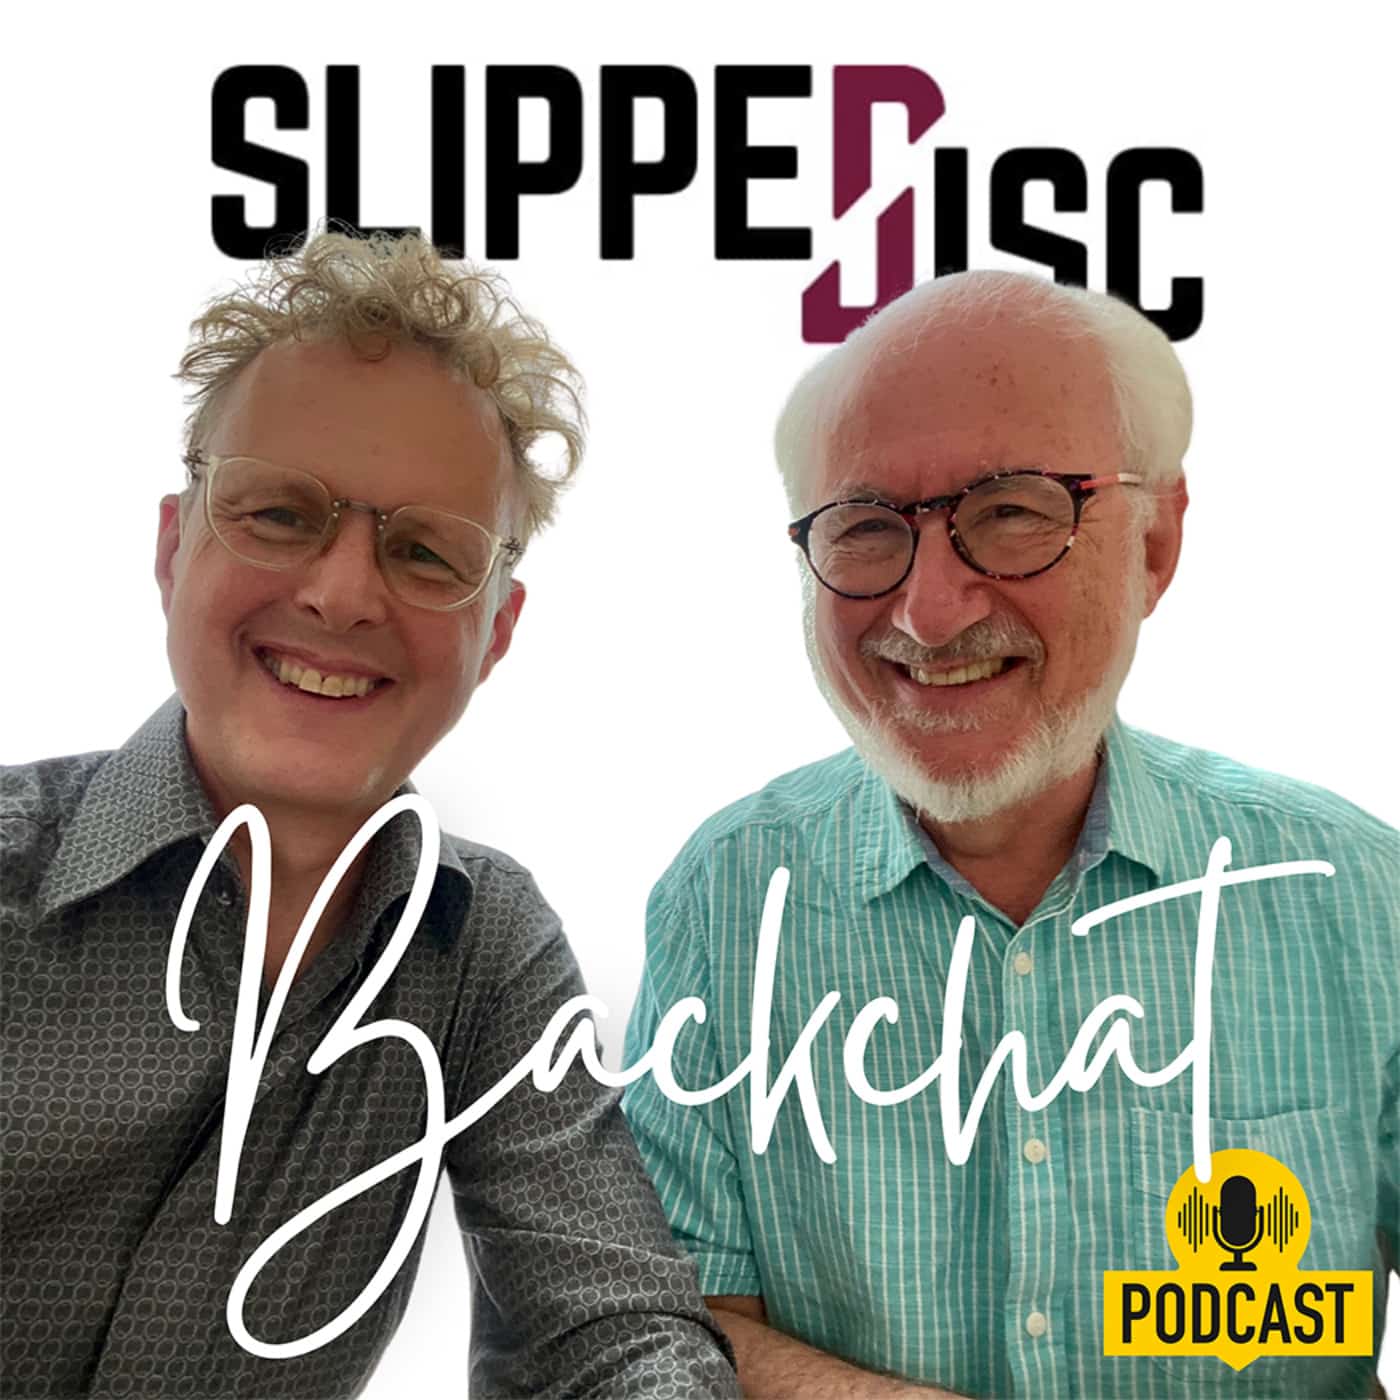 Welcome to the Slipped Disc podcast… starting now